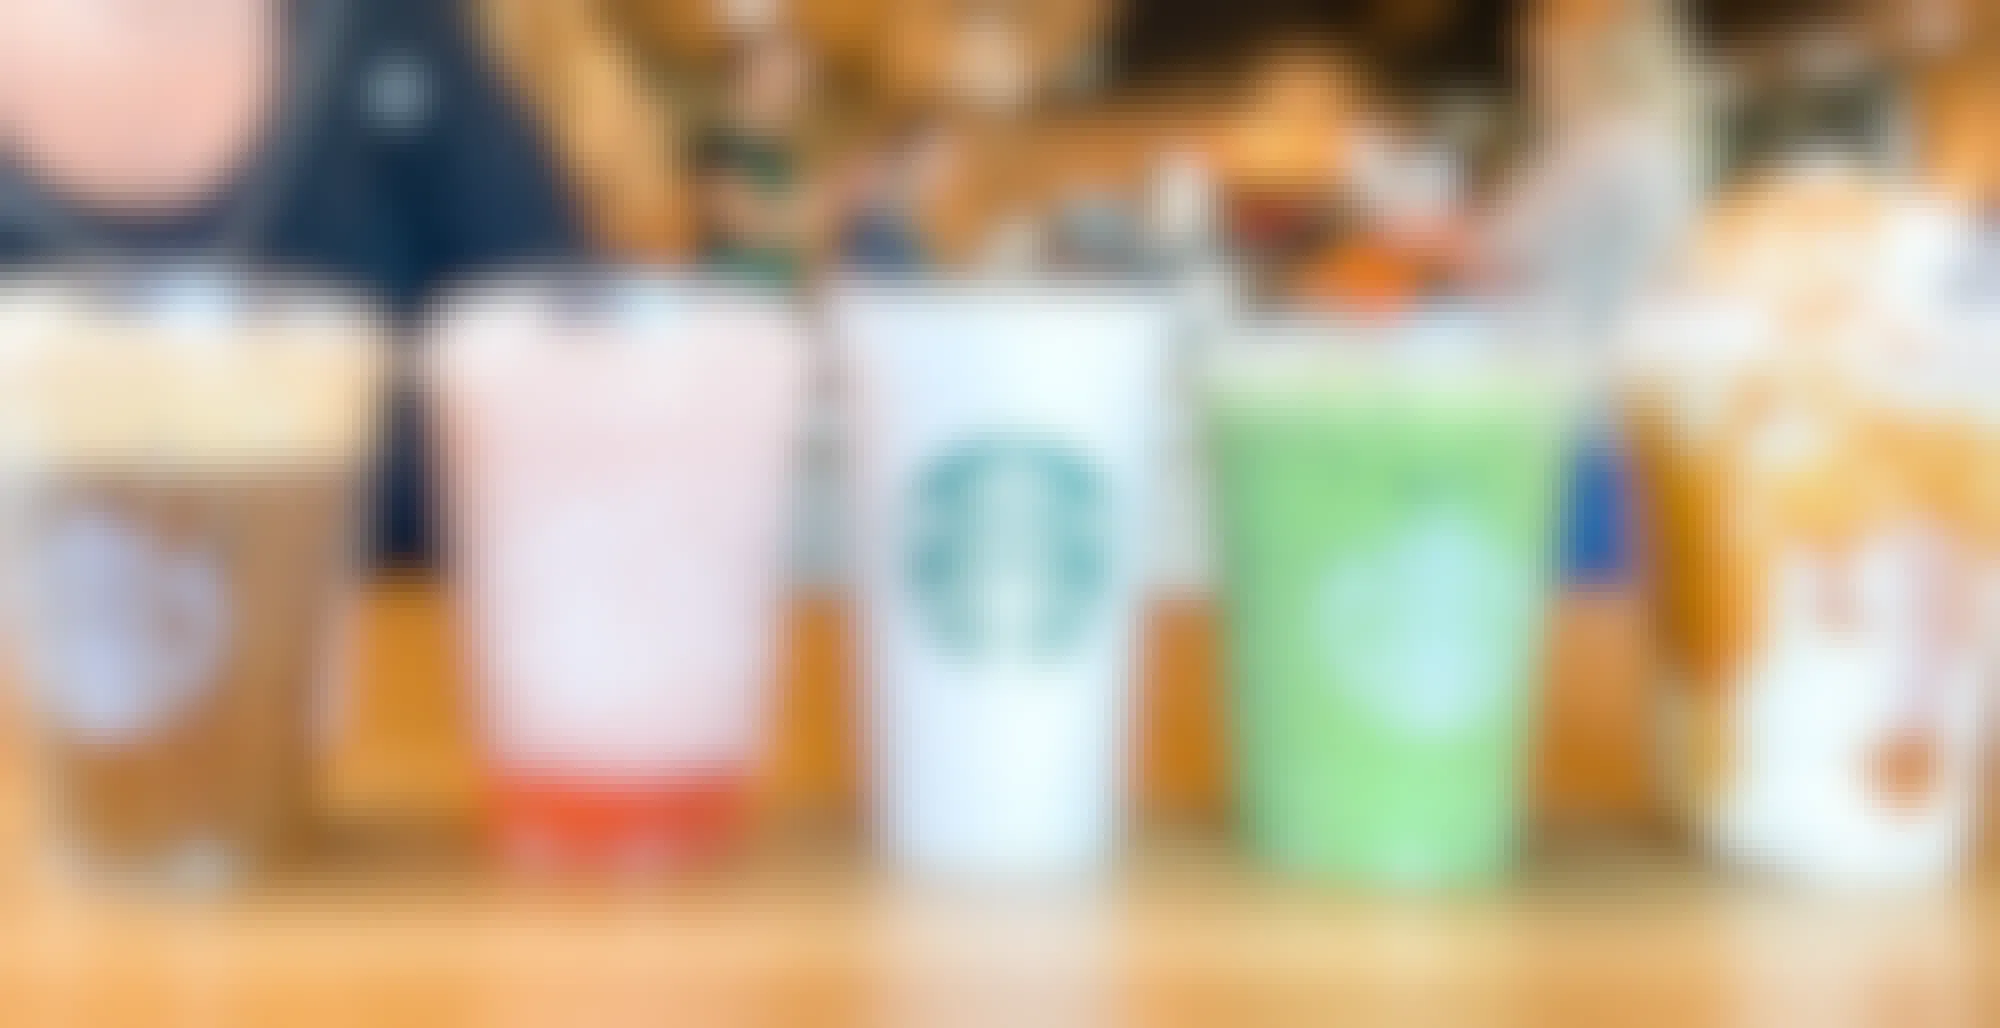 Starbucks Prices: Here's How Much Their Drinks Cost in 2023